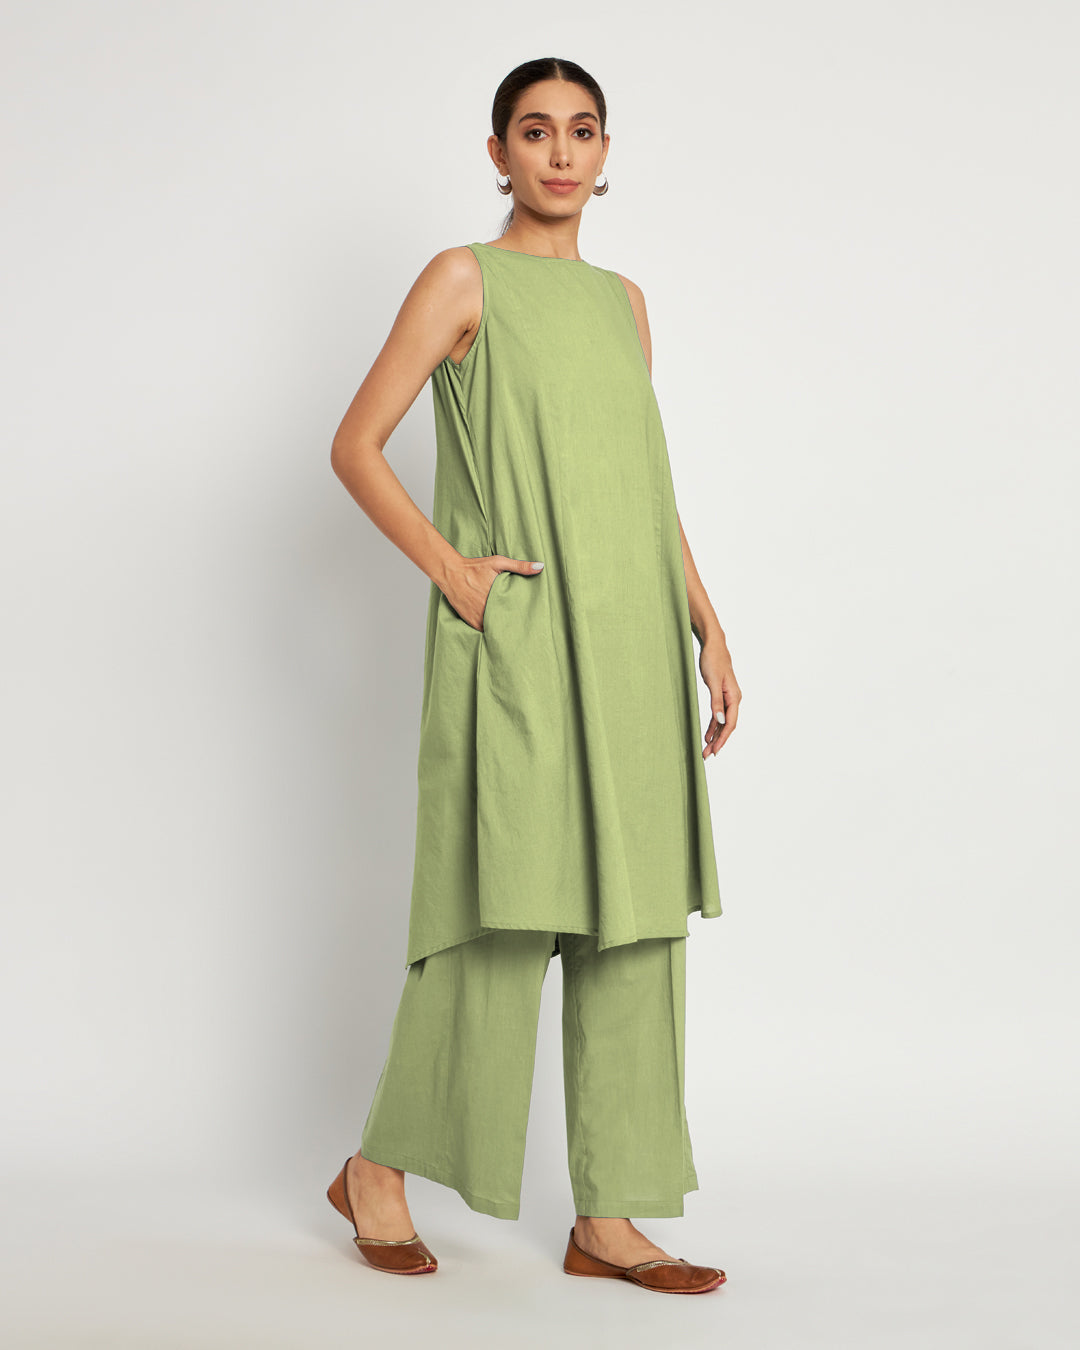 Sage Green Sleeveless A-Line Solid Kurta (Without Bottoms)